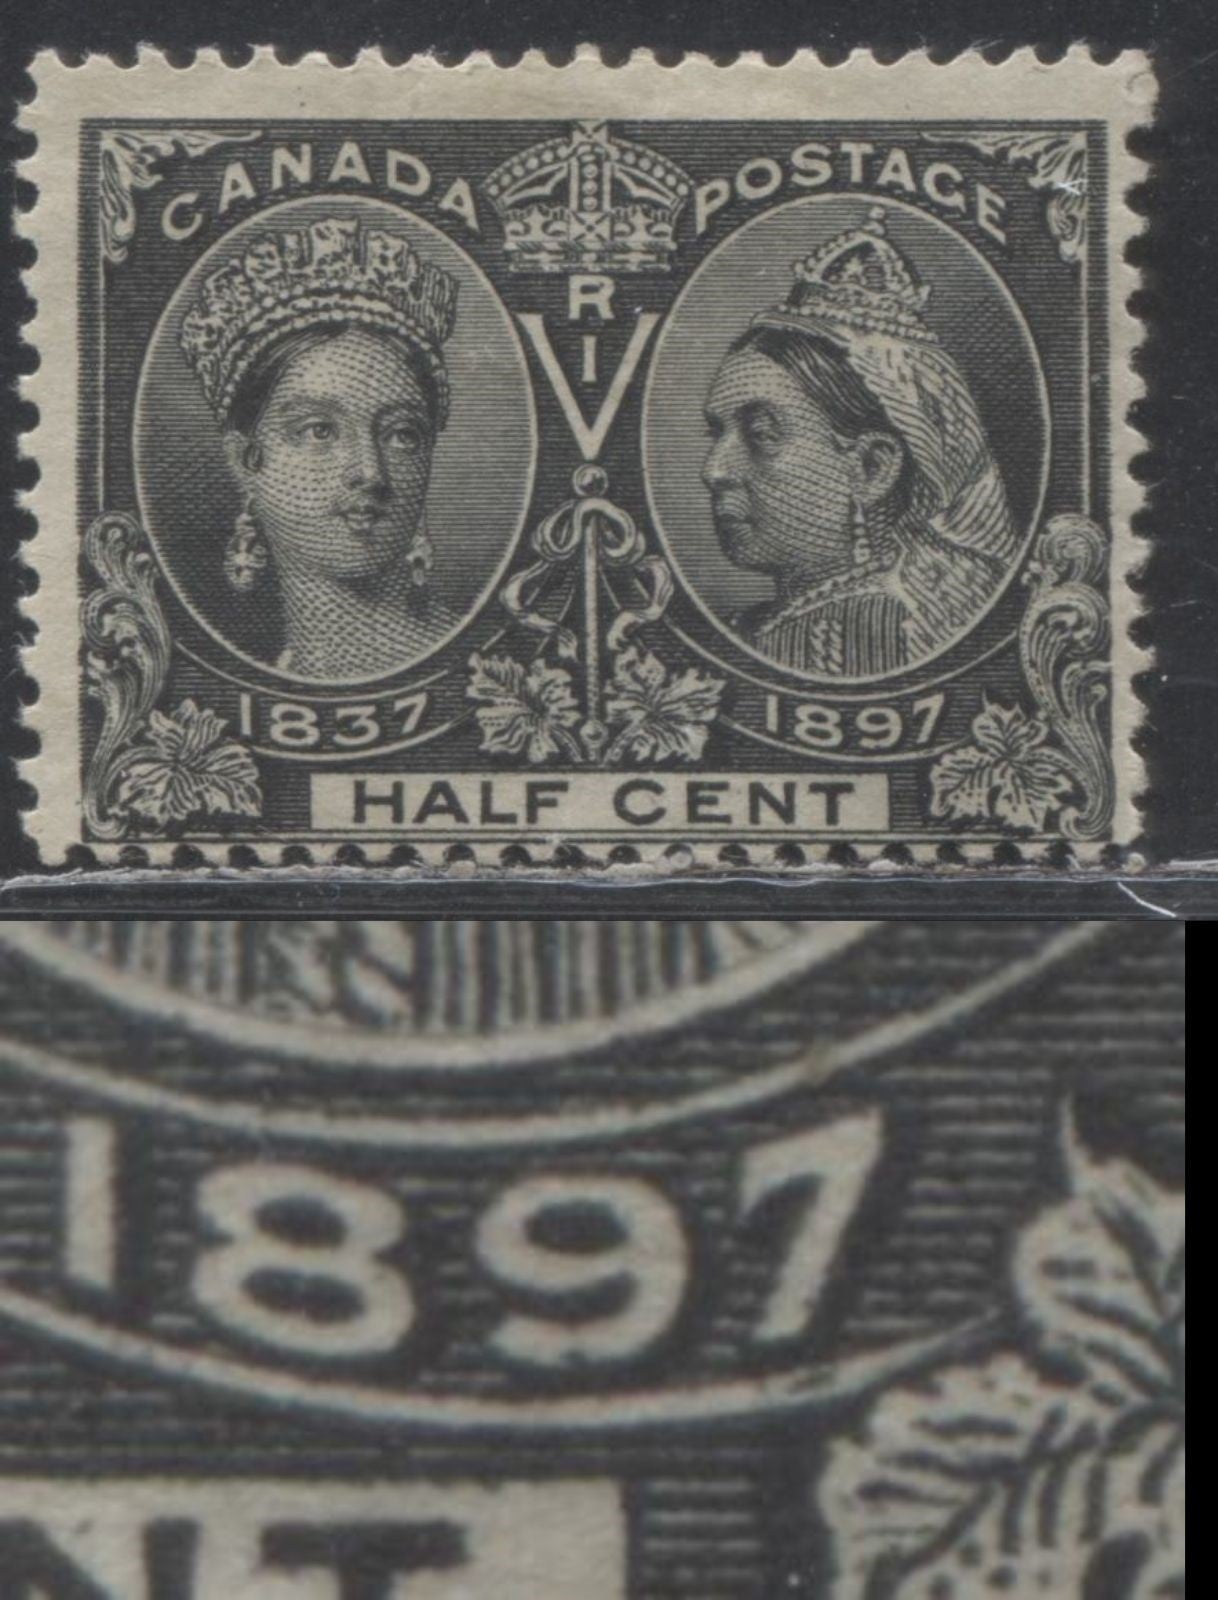 Lot 163 Canada # 50 1/2c Jet Black on White Paper Queen Victoria, 1897 Diamond Jubilee Issue, A Good OG Example, Showing Dot in "9" and Line Under "7" of "1897"